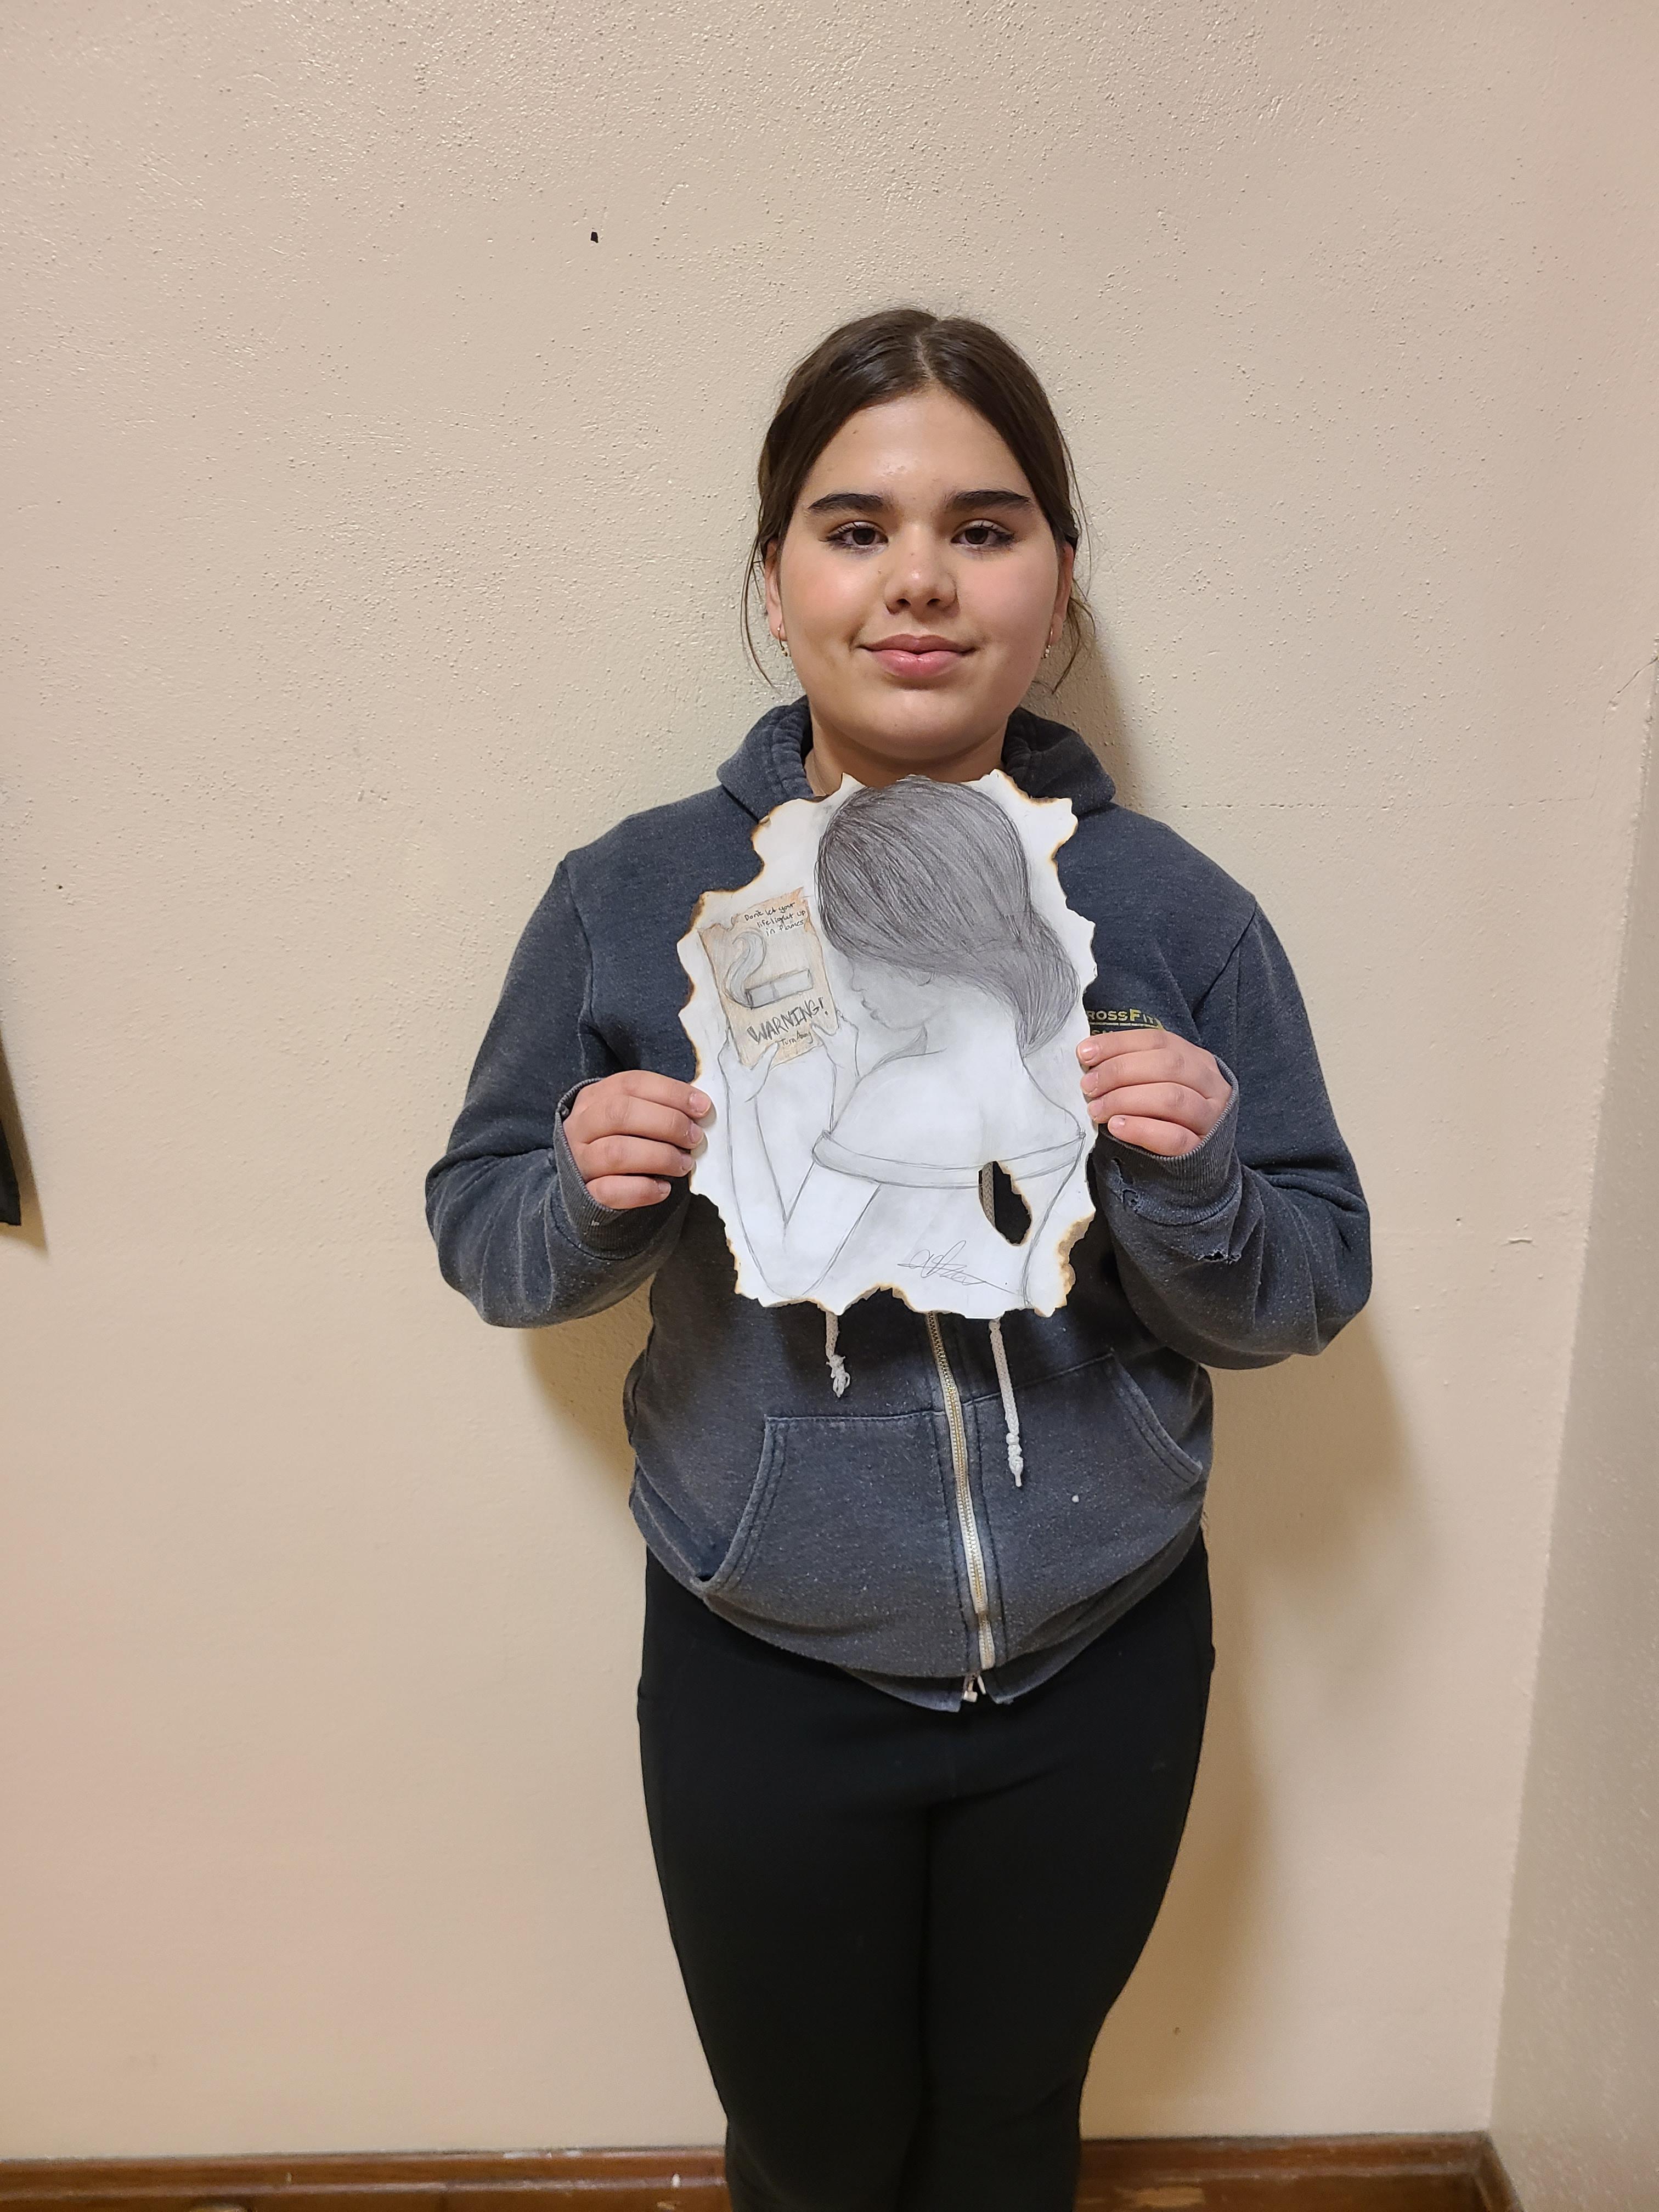 Abree Diaz Gonzalez, a student at Hebron Public Schools in Hebron, placed third in the Healthy Decision-Making art contest in North Dakota. (Submitted photo)